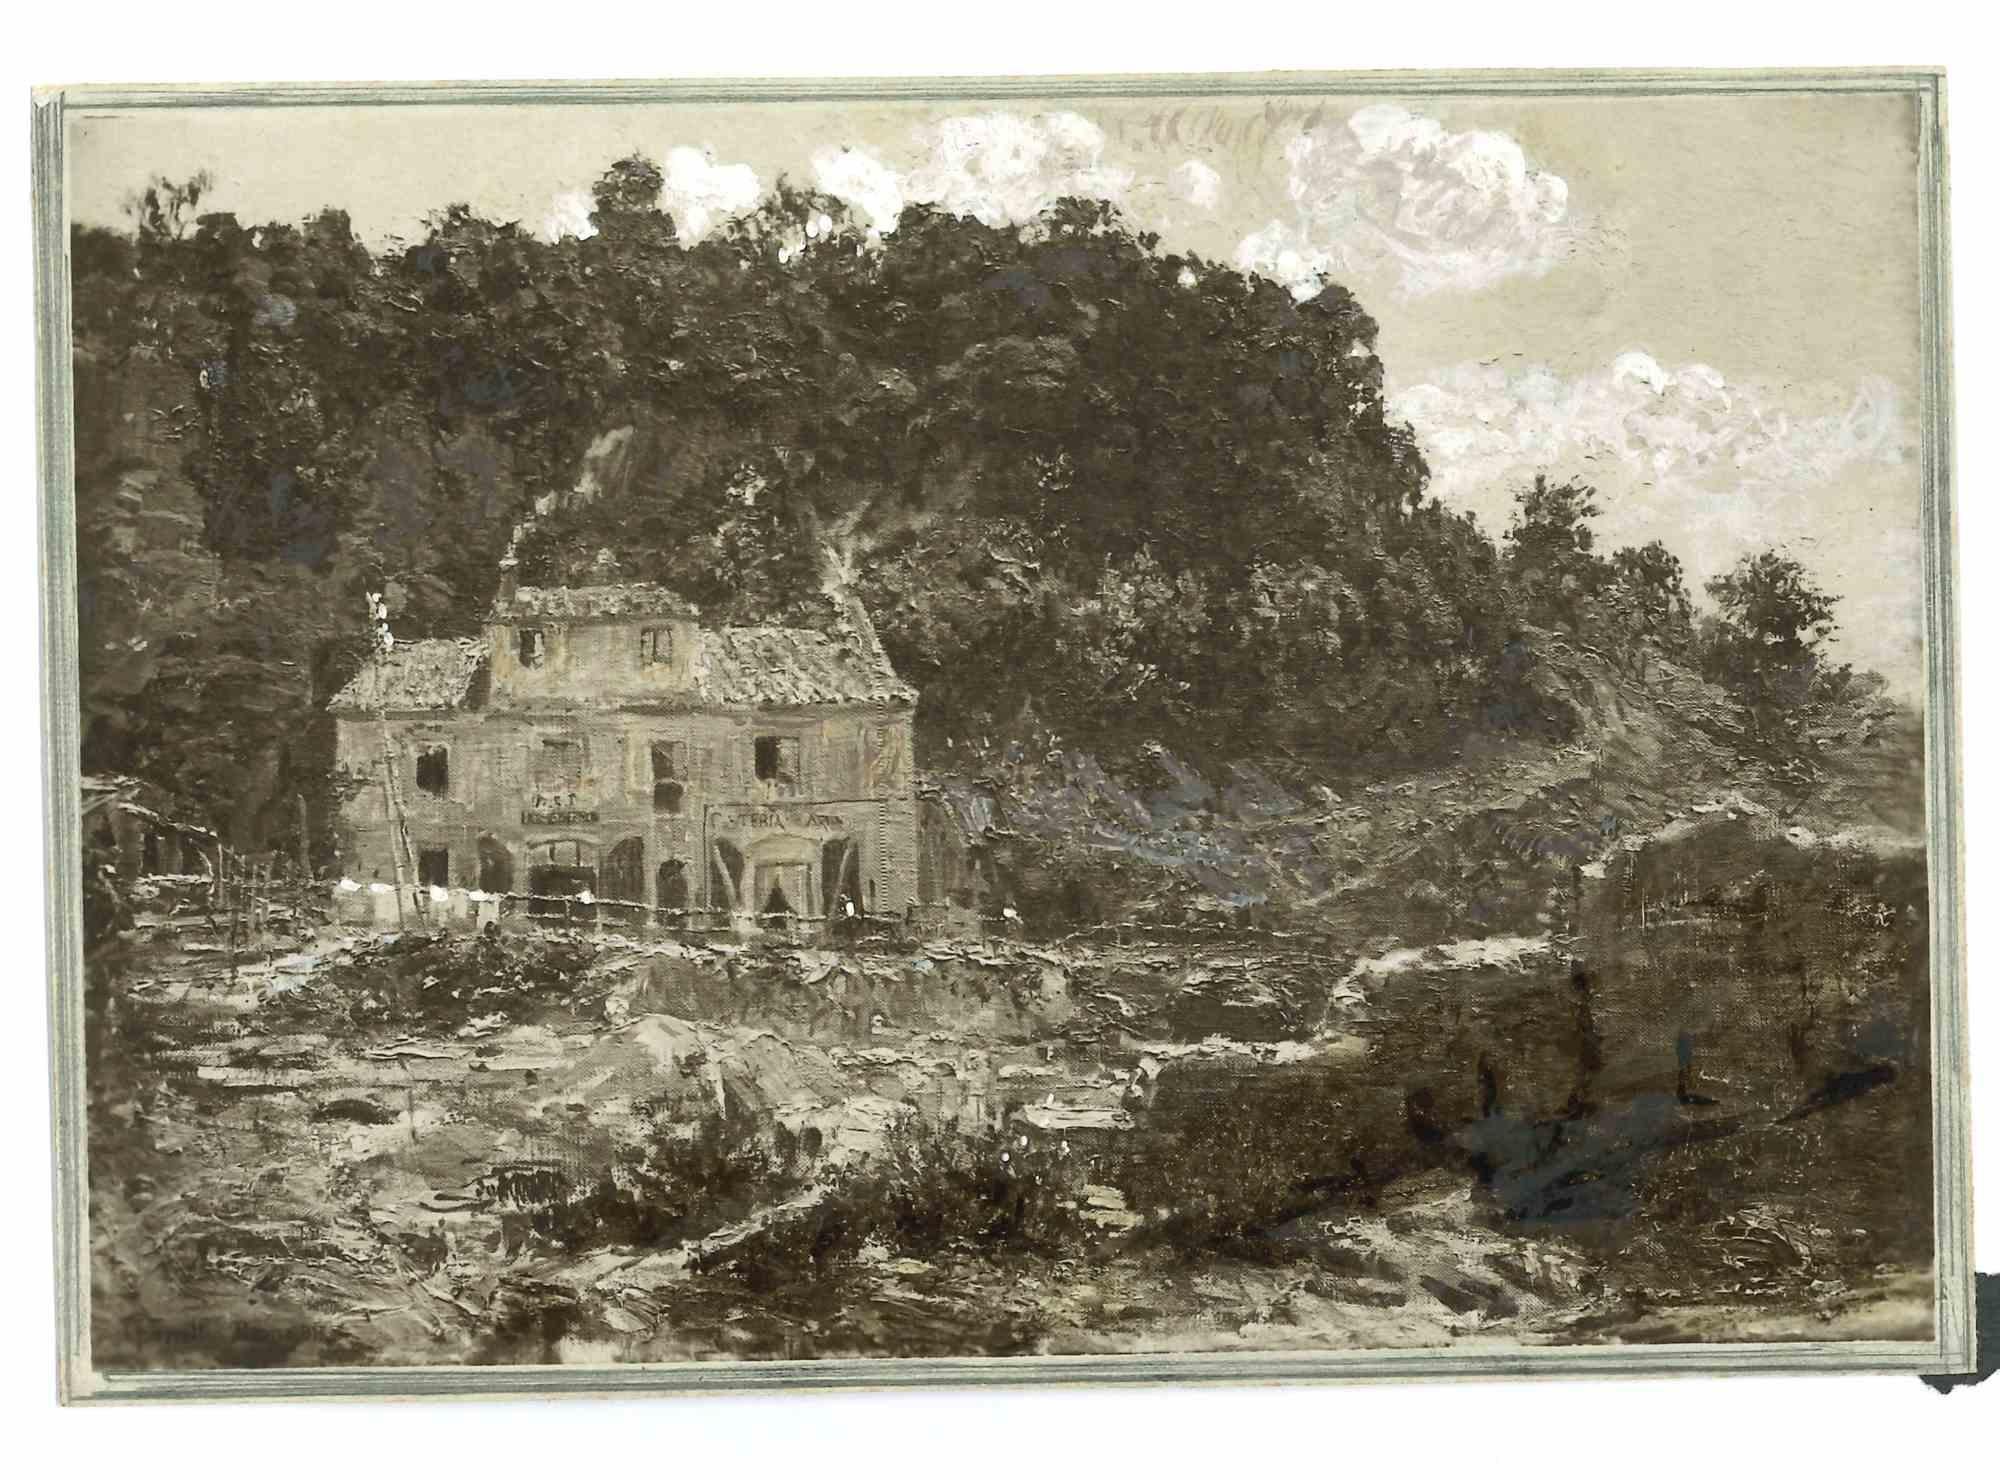 Unknown Figurative Photograph - Vintage Photo of Painting  - Country House - Early 20th Century